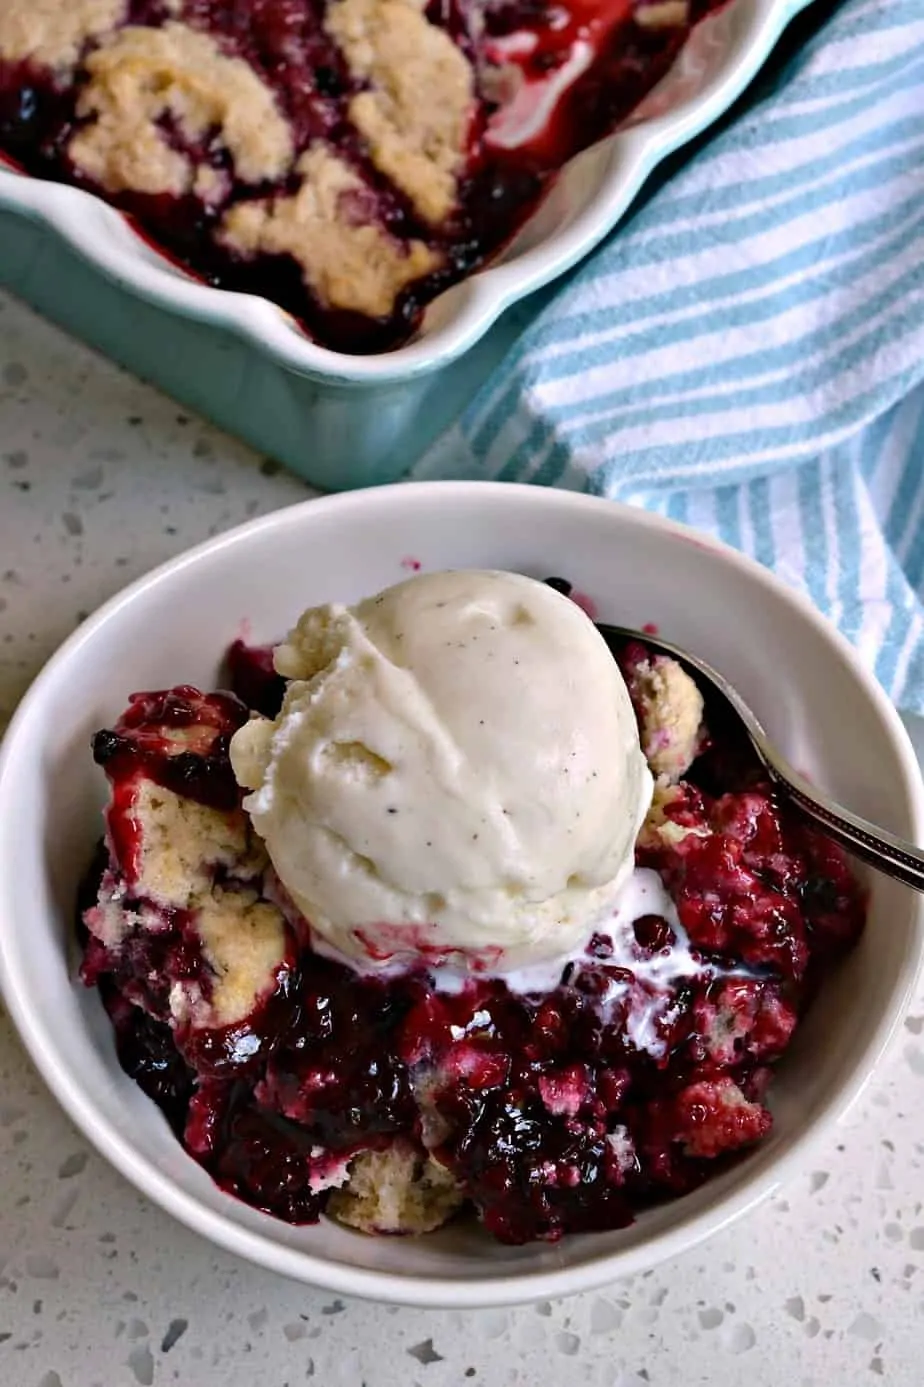 Serve this scrumptious blackberry cobbler warm right out of the oven with a scoop of French vanilla ice cream.